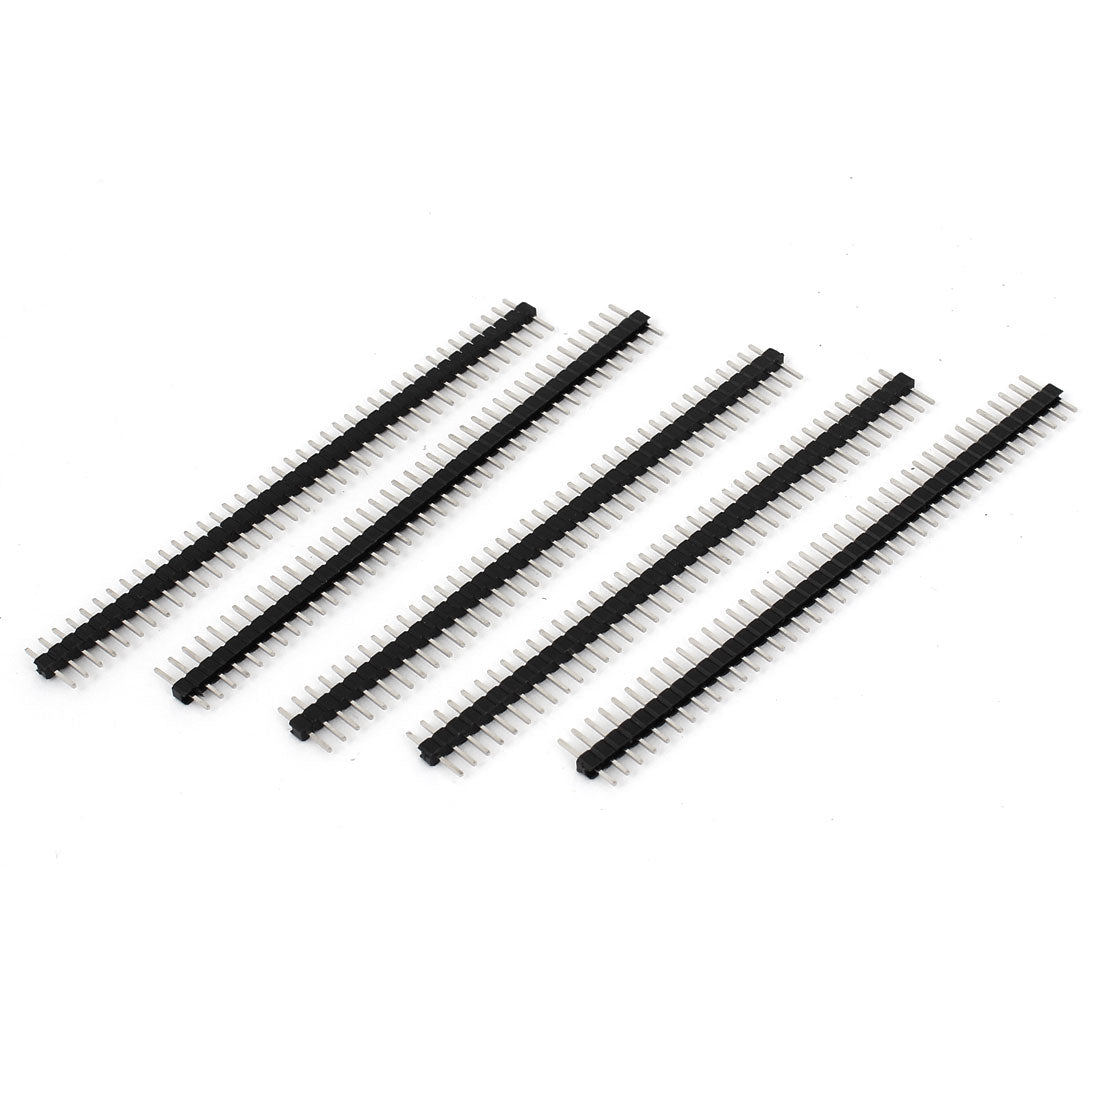 uxcell Uxcell 5 Pcs 2mm Spacing 40 Position Straight Male PCB Pin Header